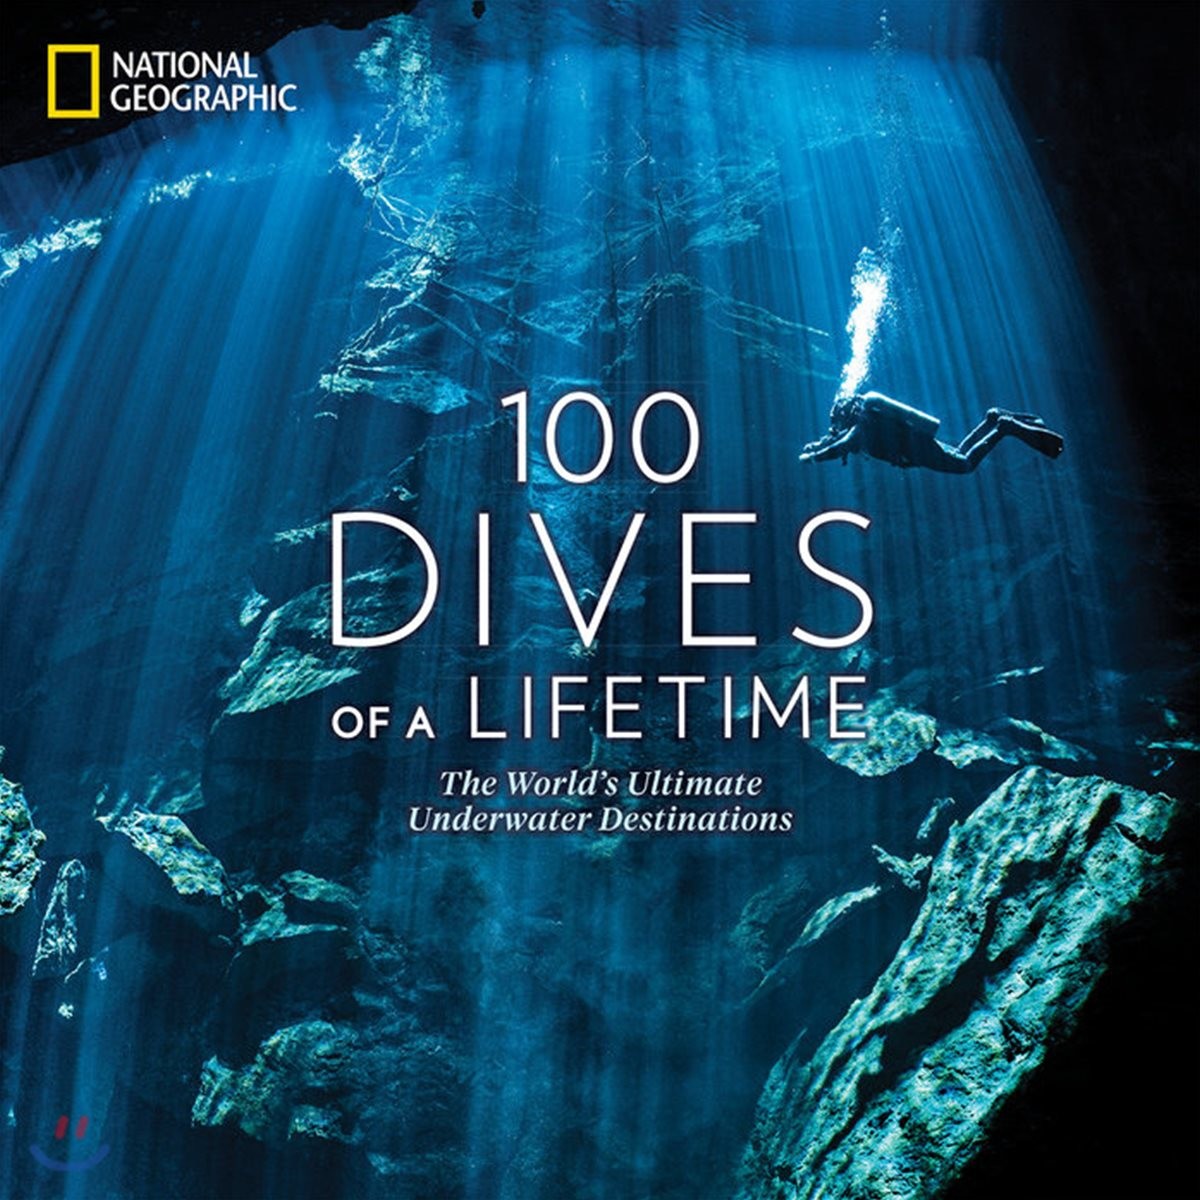 100 Dives of a Lifetime: The Worlds Ultimate Underwater Destinations